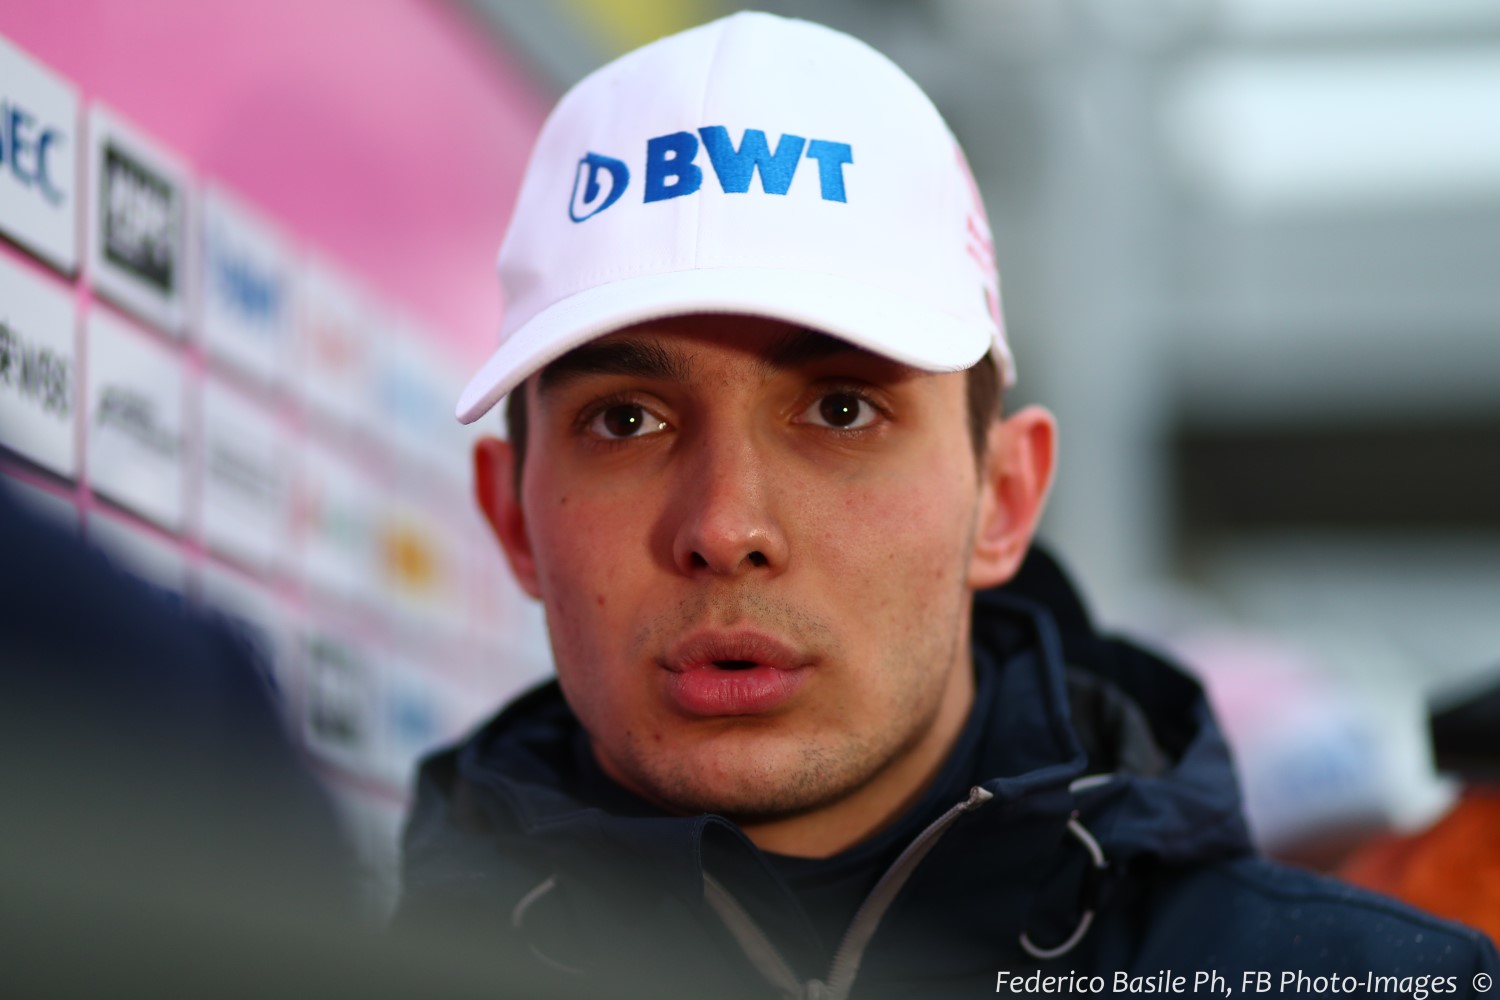 The question is what Ocon will be racing in 2020